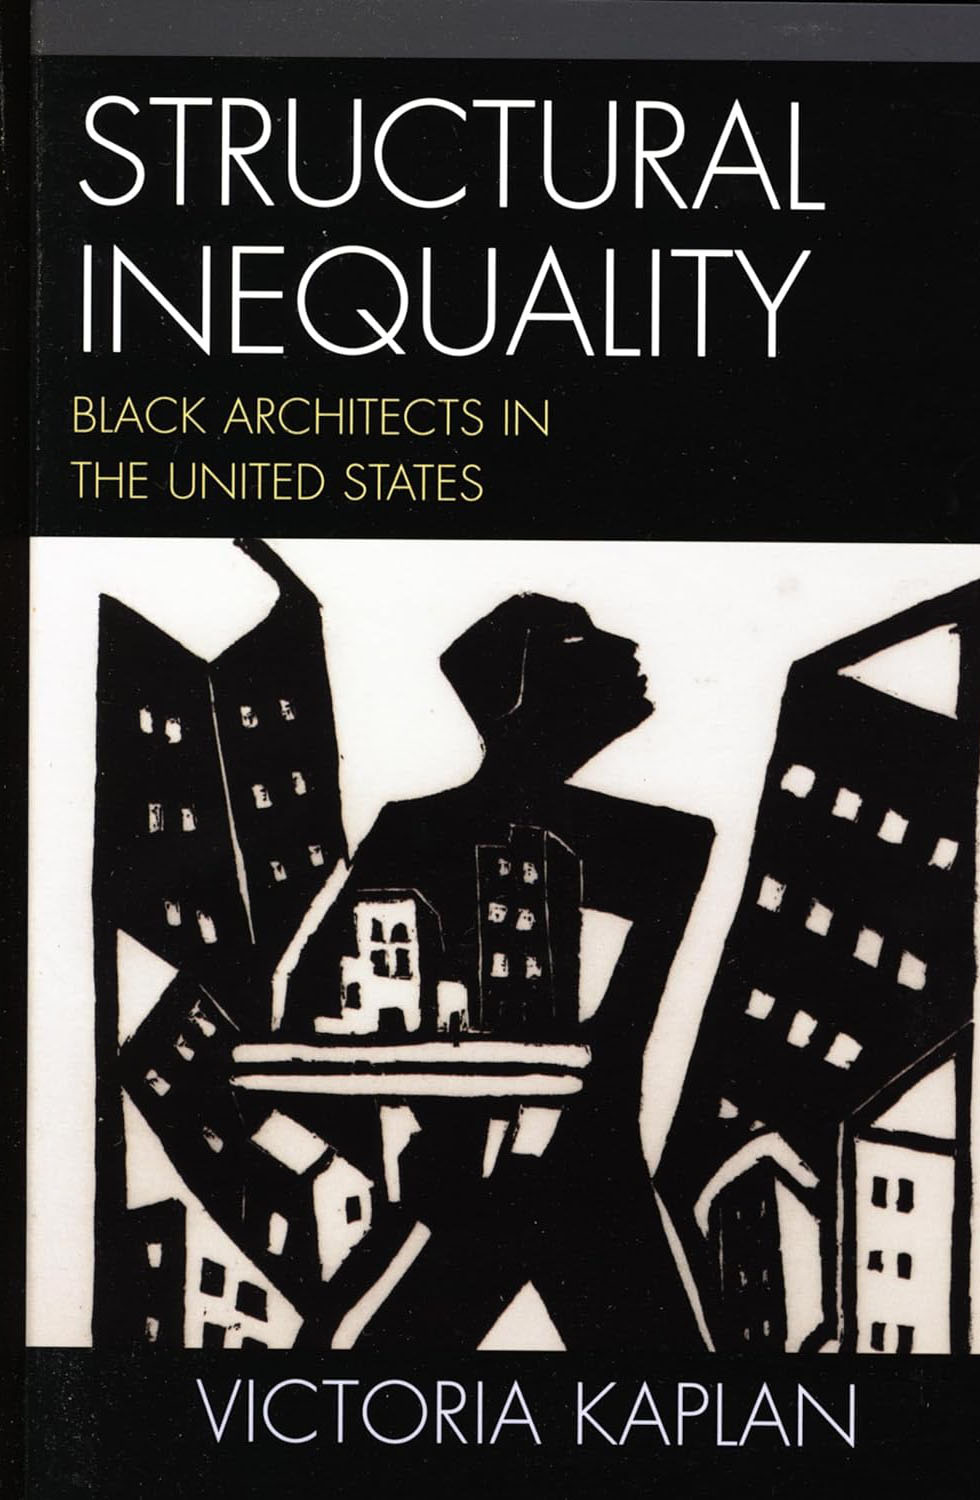 "Structural Inequality"